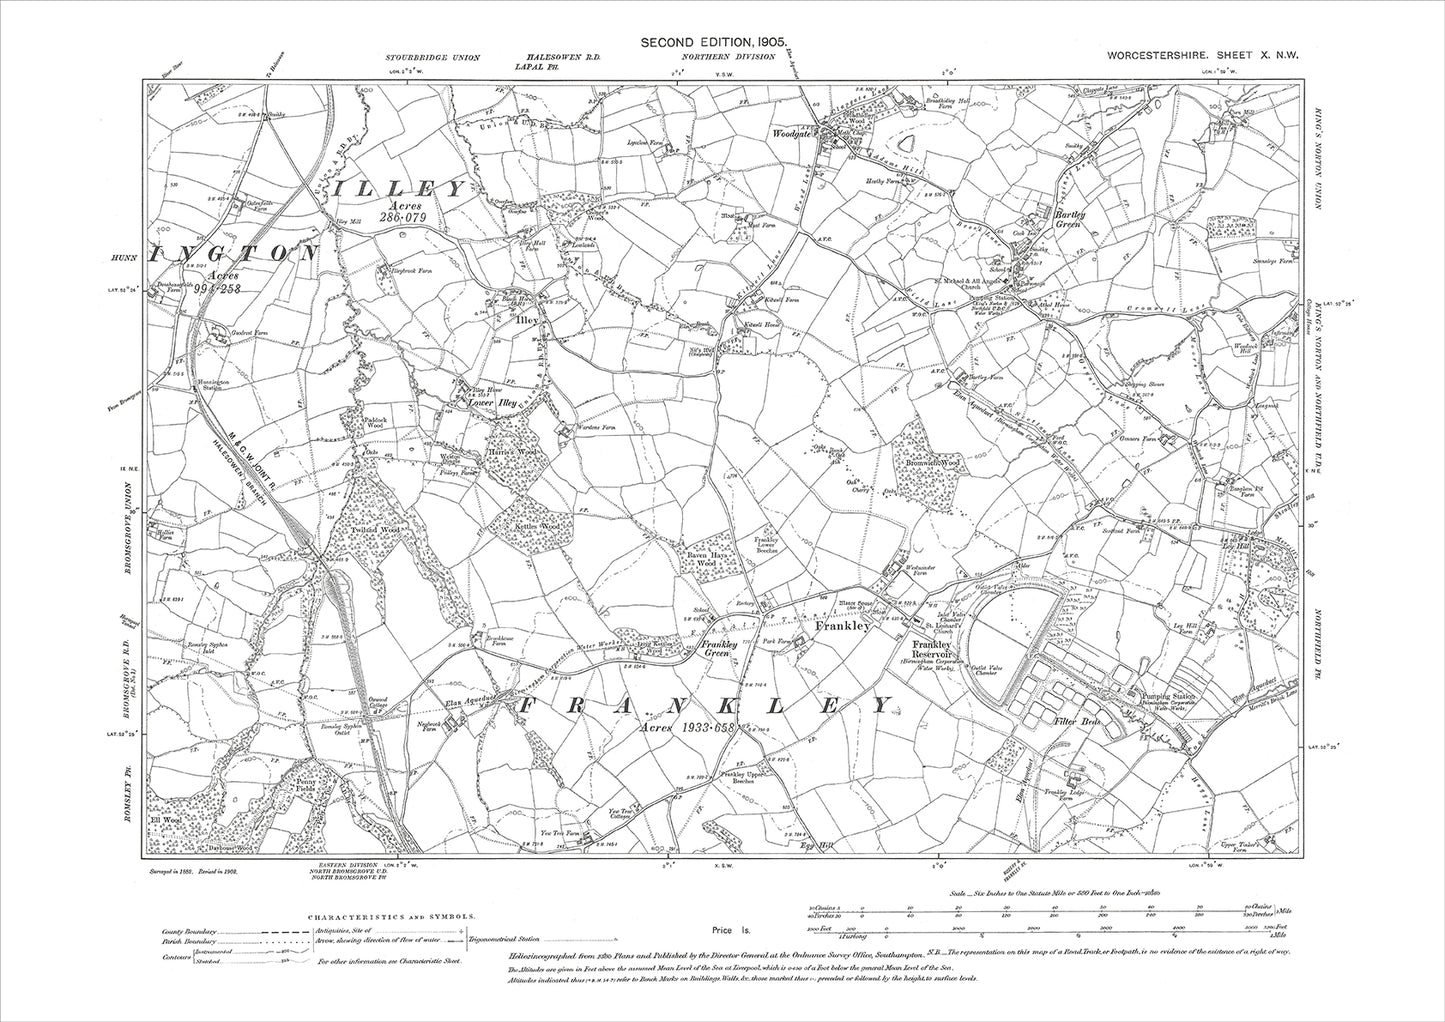 Frankley, Illey, Woodgate, Bartley Green, old map Worcestershire 1905: 10NW